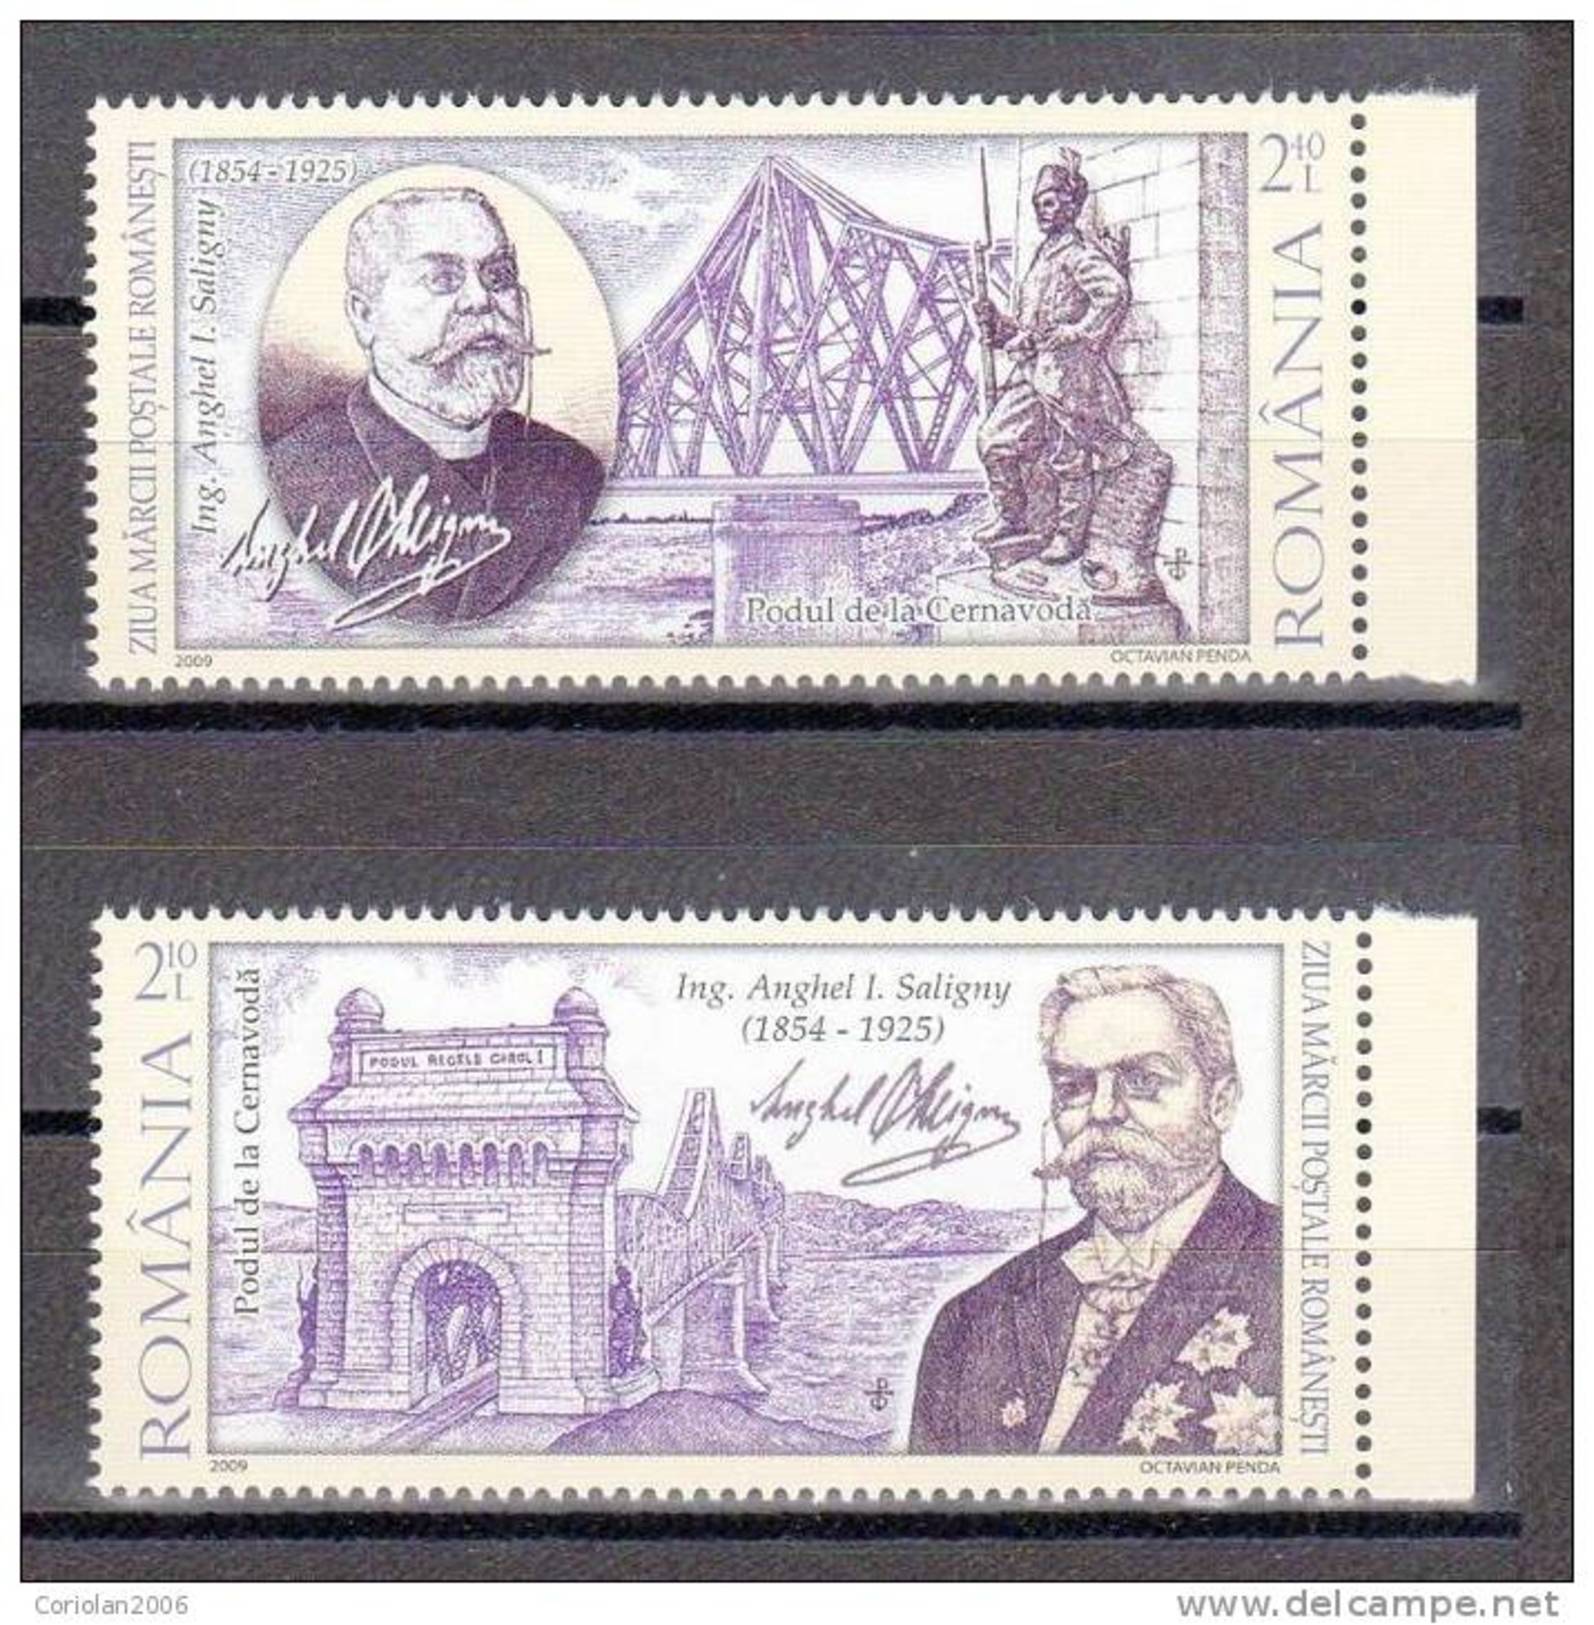 Romania 2009 / ROMANIAN POSTAGE STAMP DAY / ANGHEL I. SALIGNY / 155 Years Since His Birth - Unused Stamps